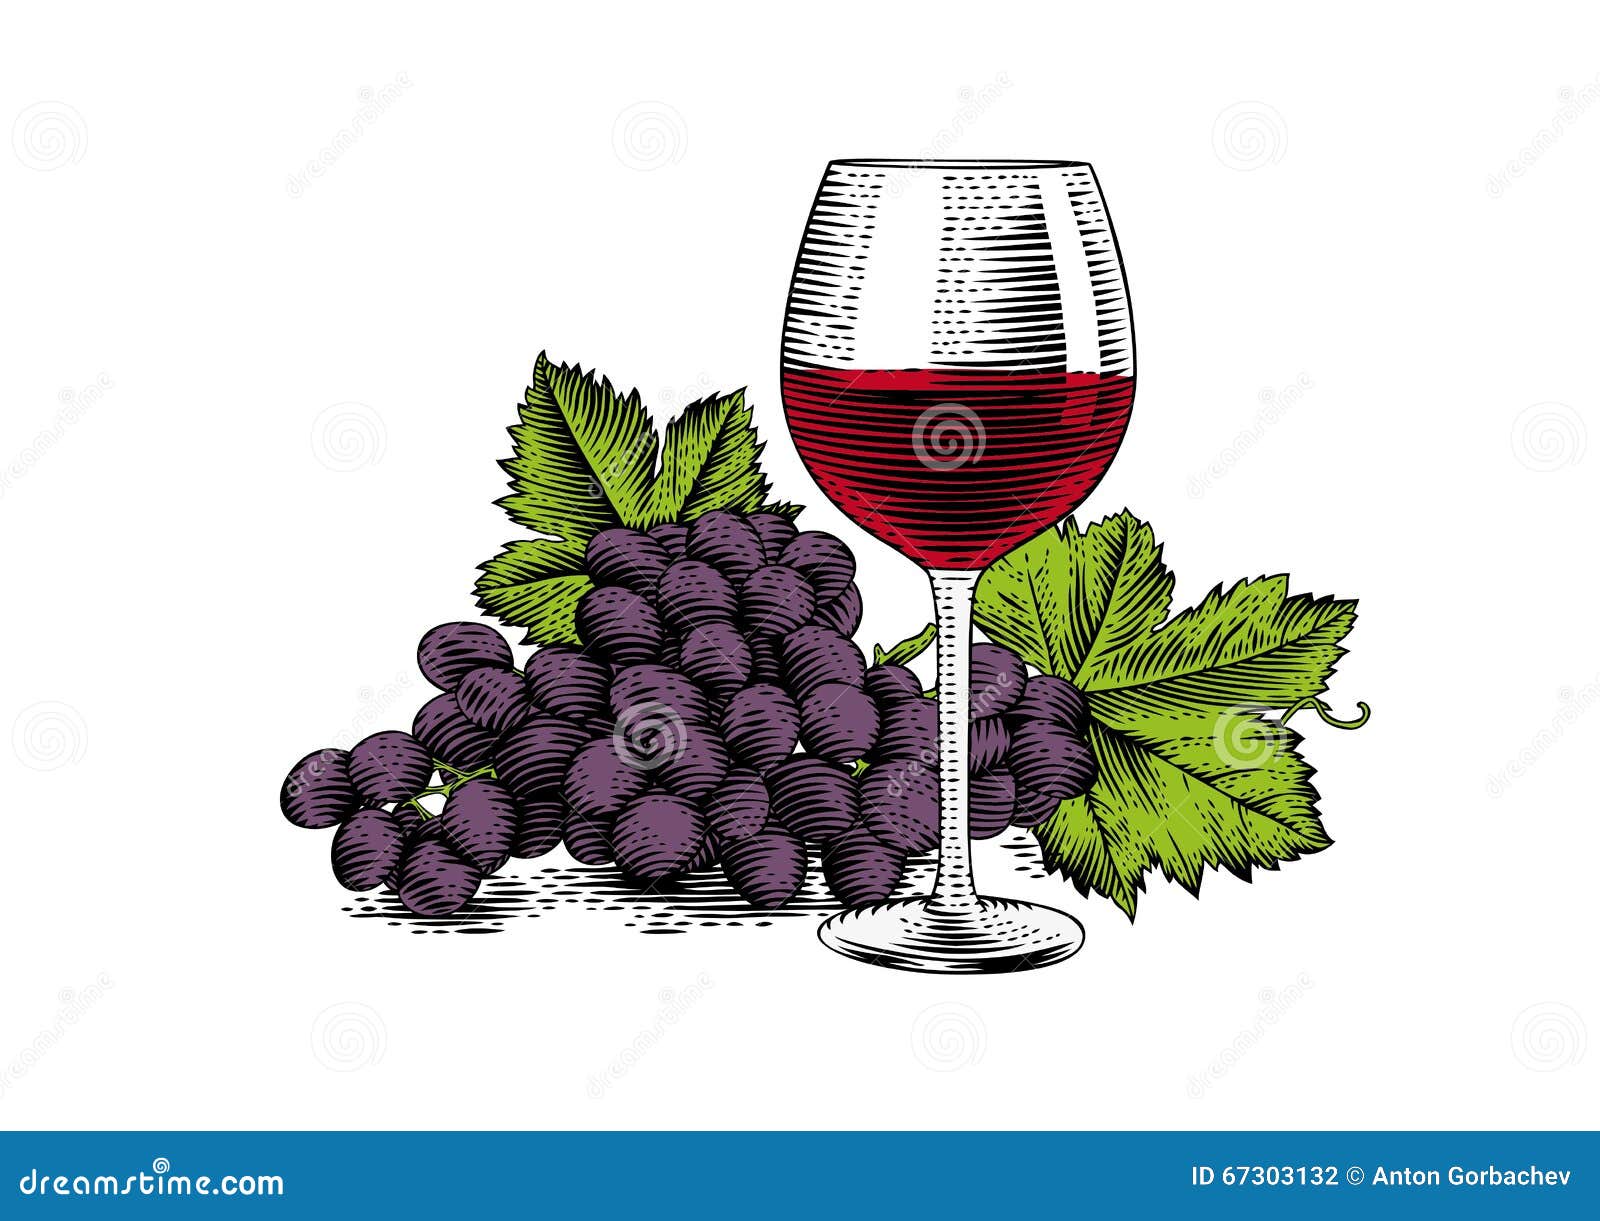 Glass of red wine stock vector. Illustration of alcohol - 67303132